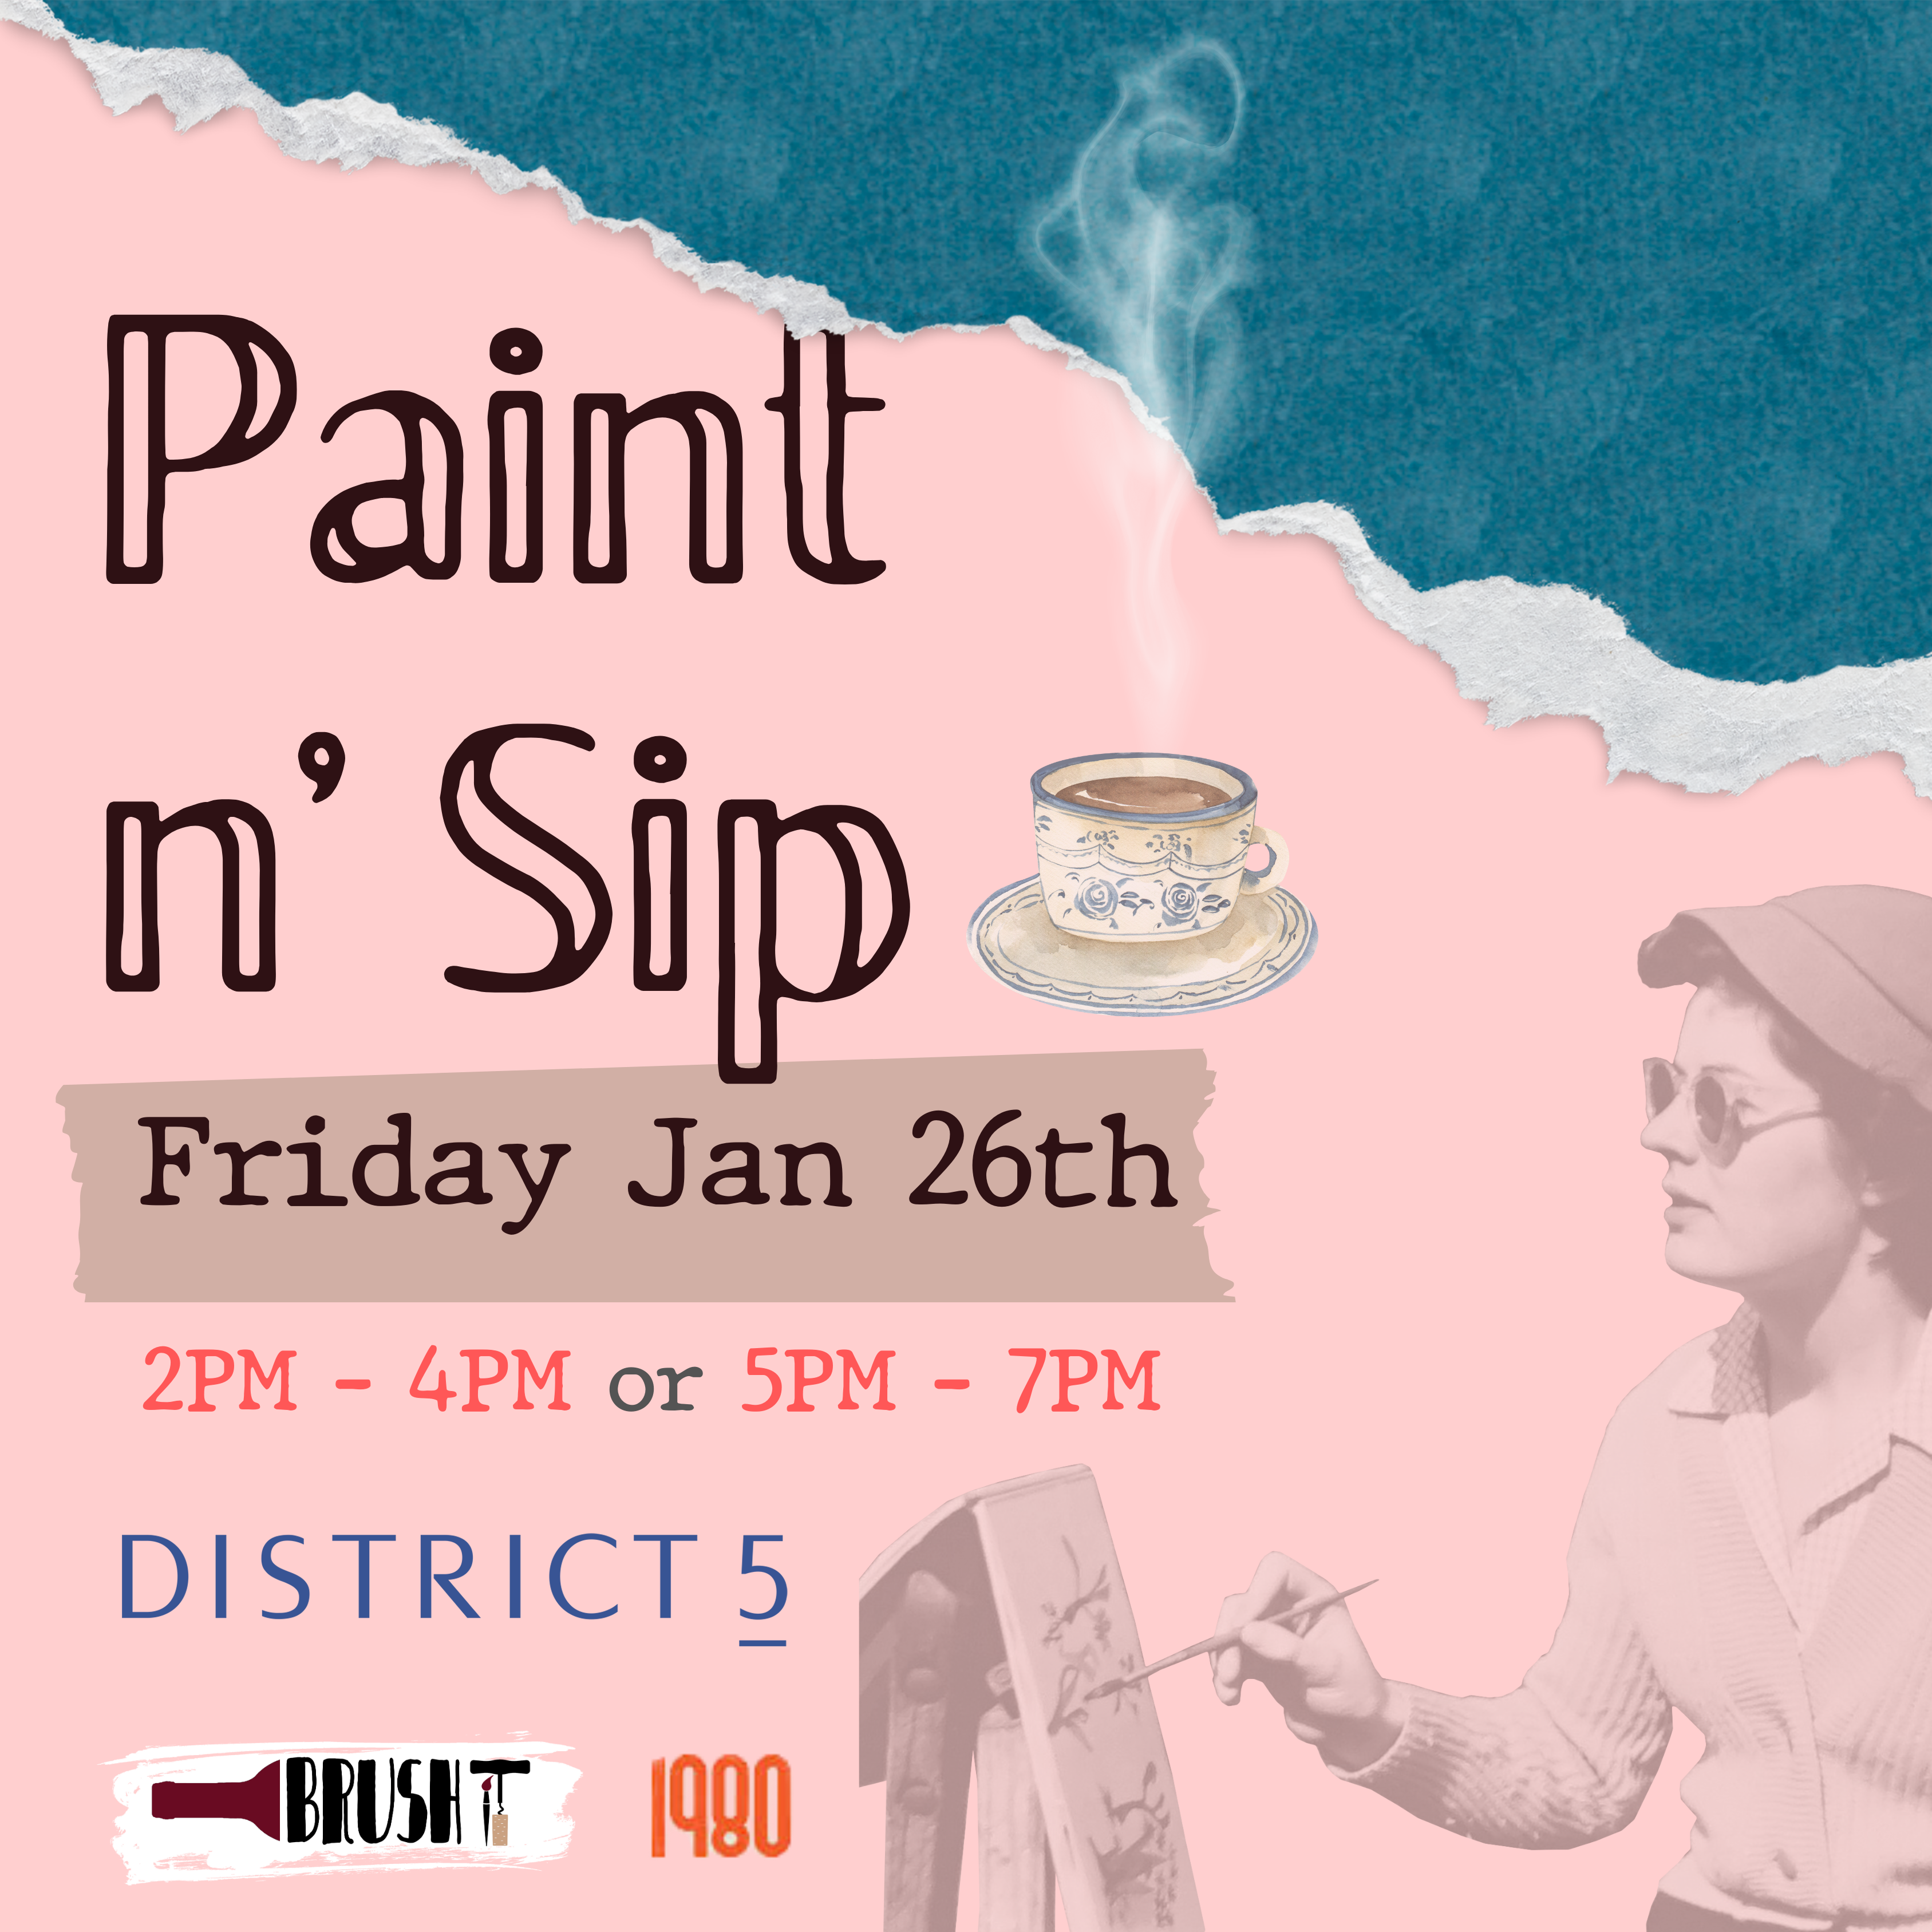 FRIDAY, January 26th - 5:00 pm - 7:00 pm - DISTRICT 5 - NEW CAIRO